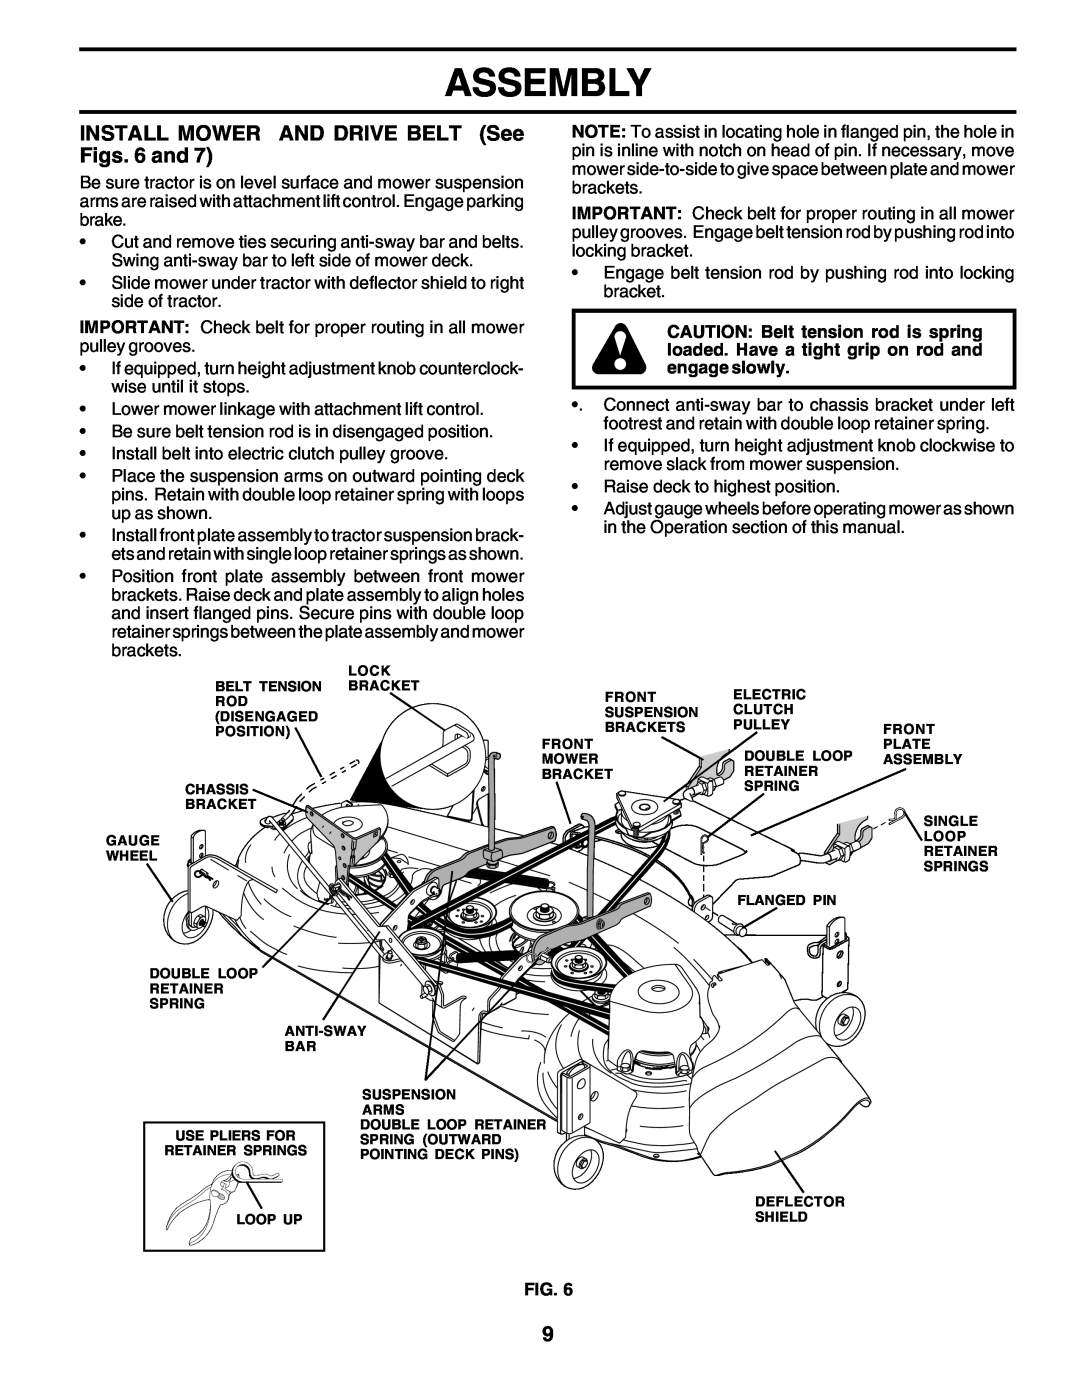 Poulan 180200 owner manual Assembly, INSTALL MOWER AND DRIVE BELT See Figs. 6 and 